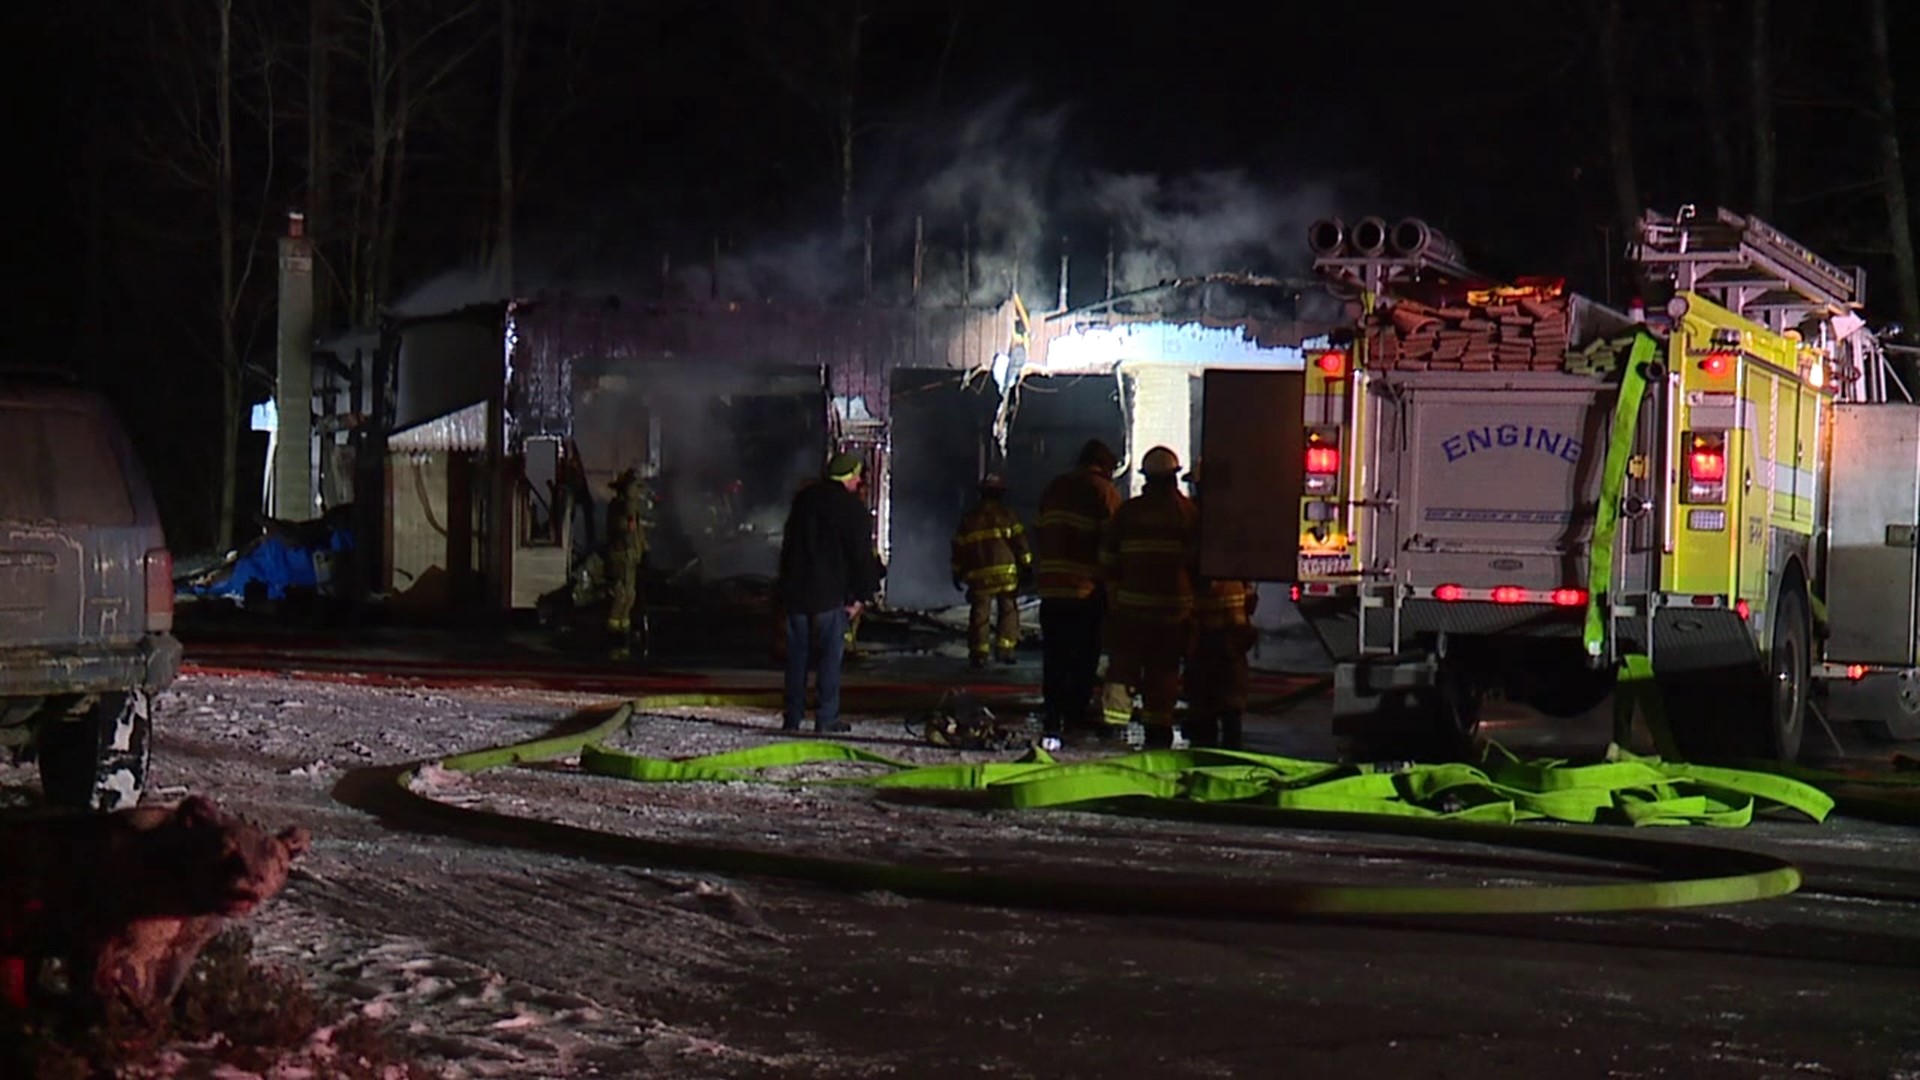 The fire started around 8:30 p.m. Tuesday night in Laurel Run.